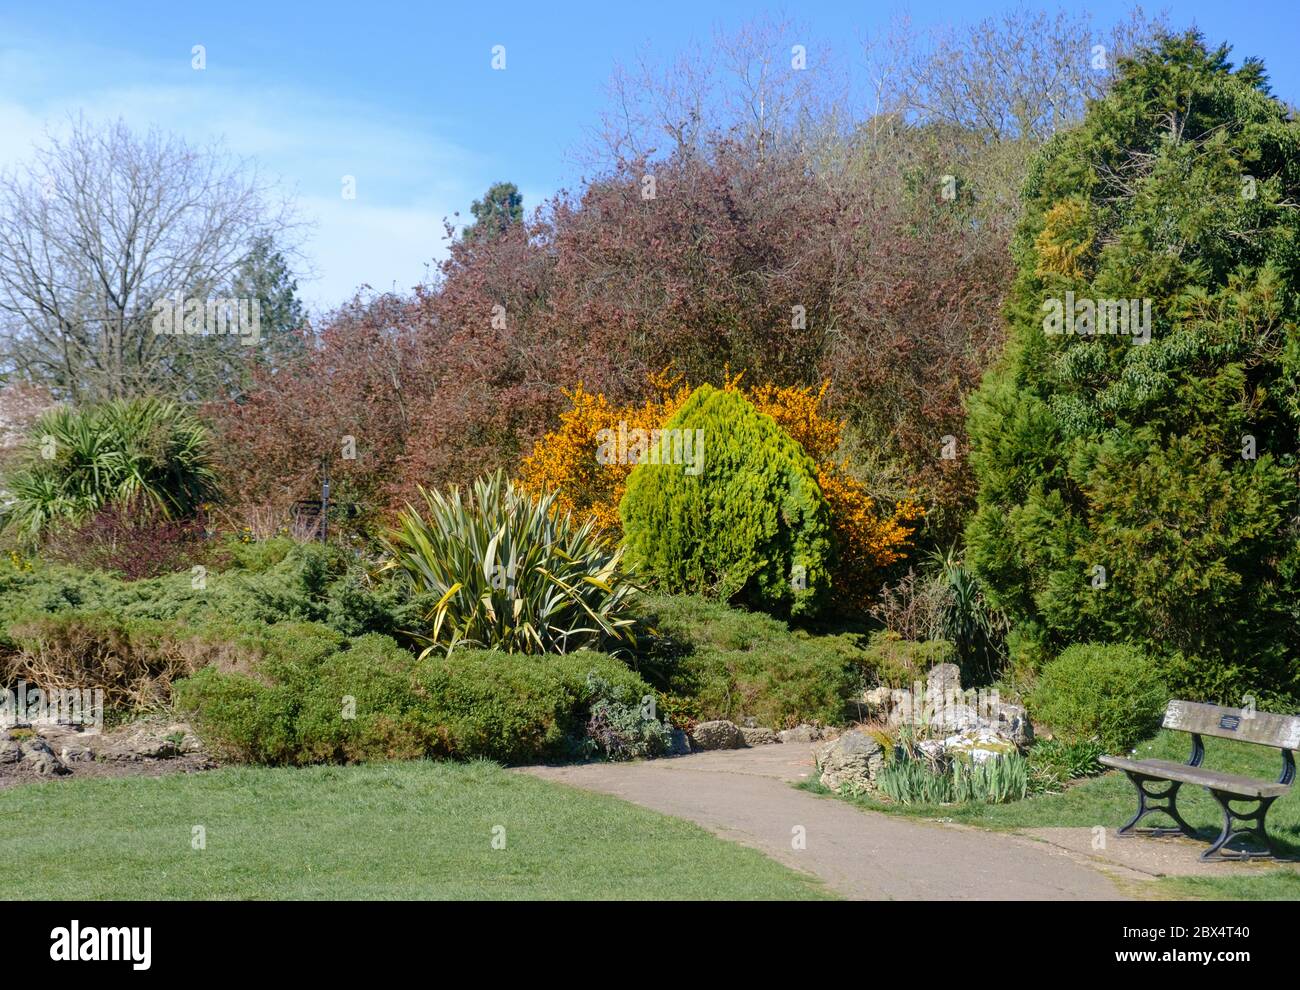 Landscaped foliage with rockeries, assorted tall trees & park bench at Pinner Memorial Park, North West London, England, UK Stock Photo